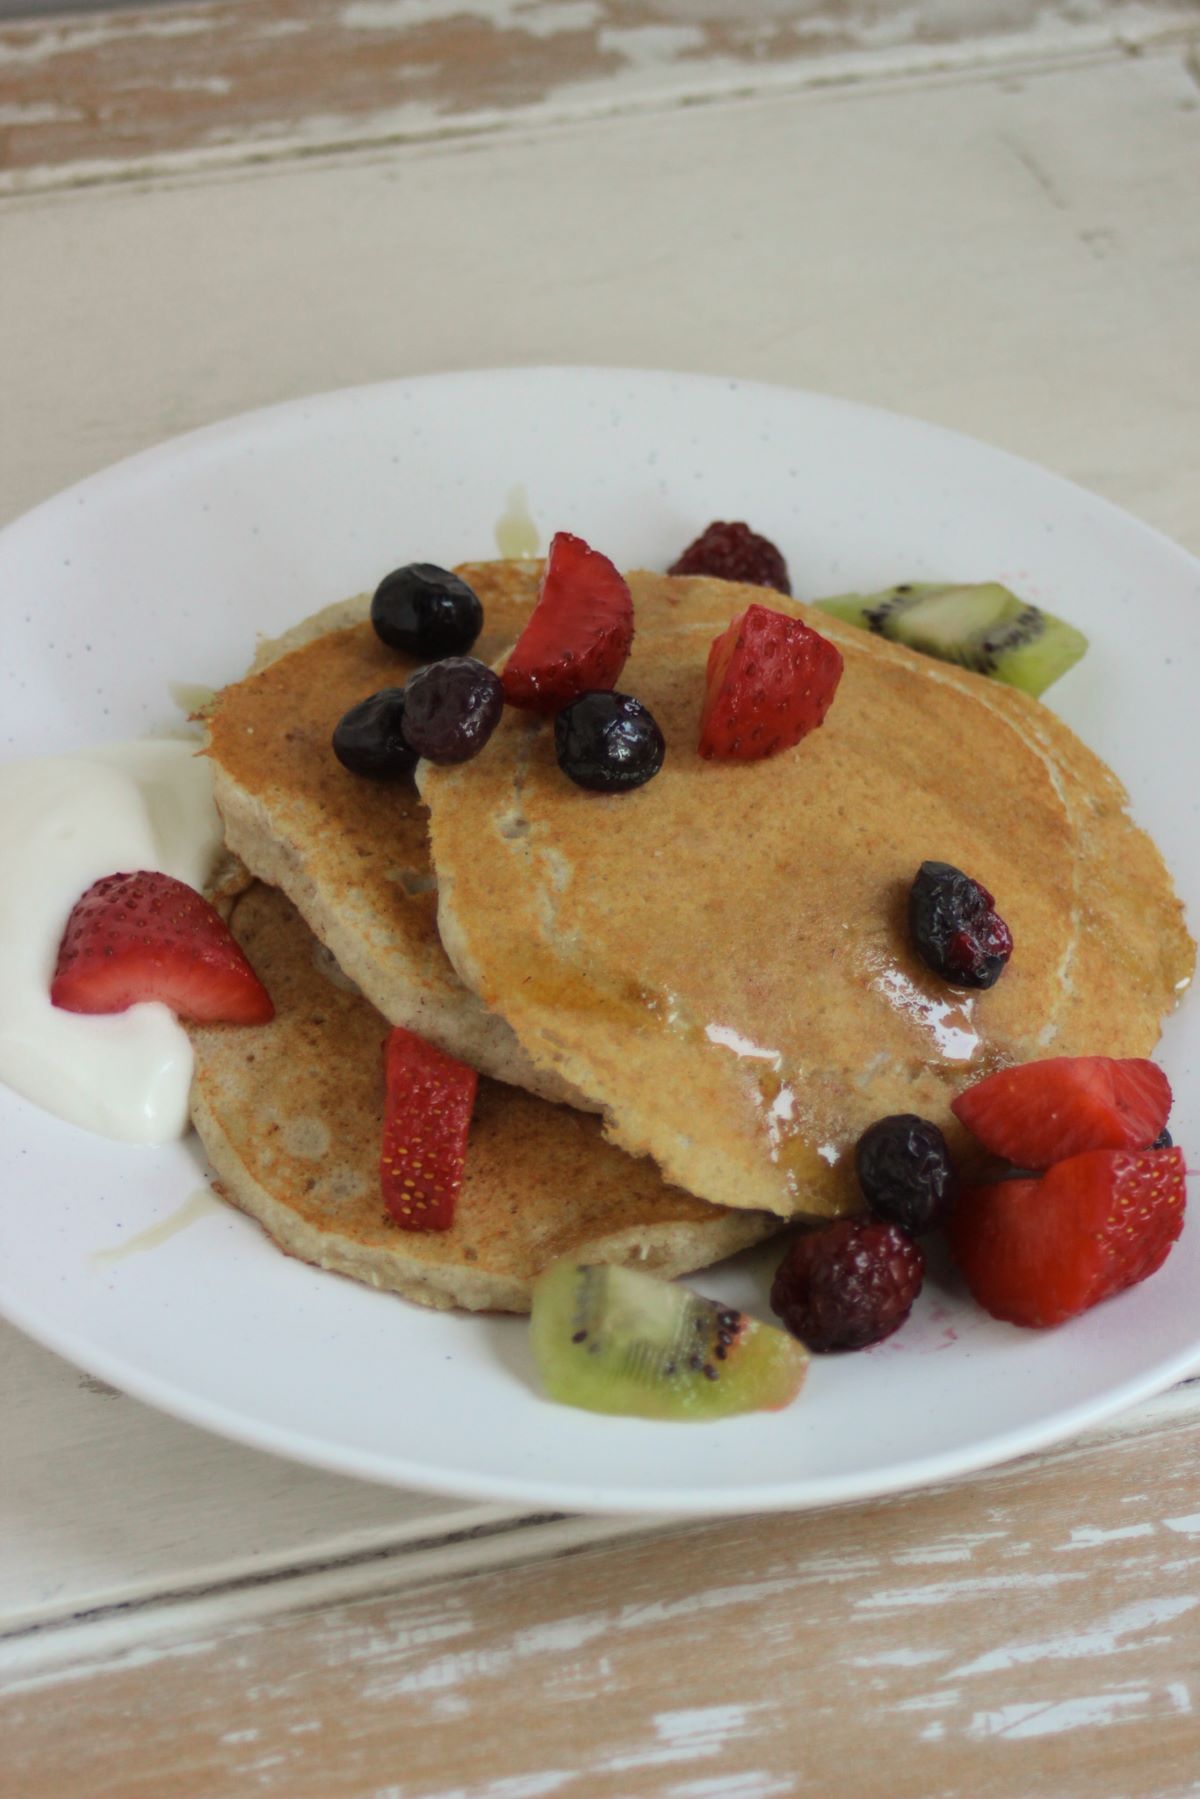 Coconut pancakes with berries, strawberries, and kiwis on a white plate.